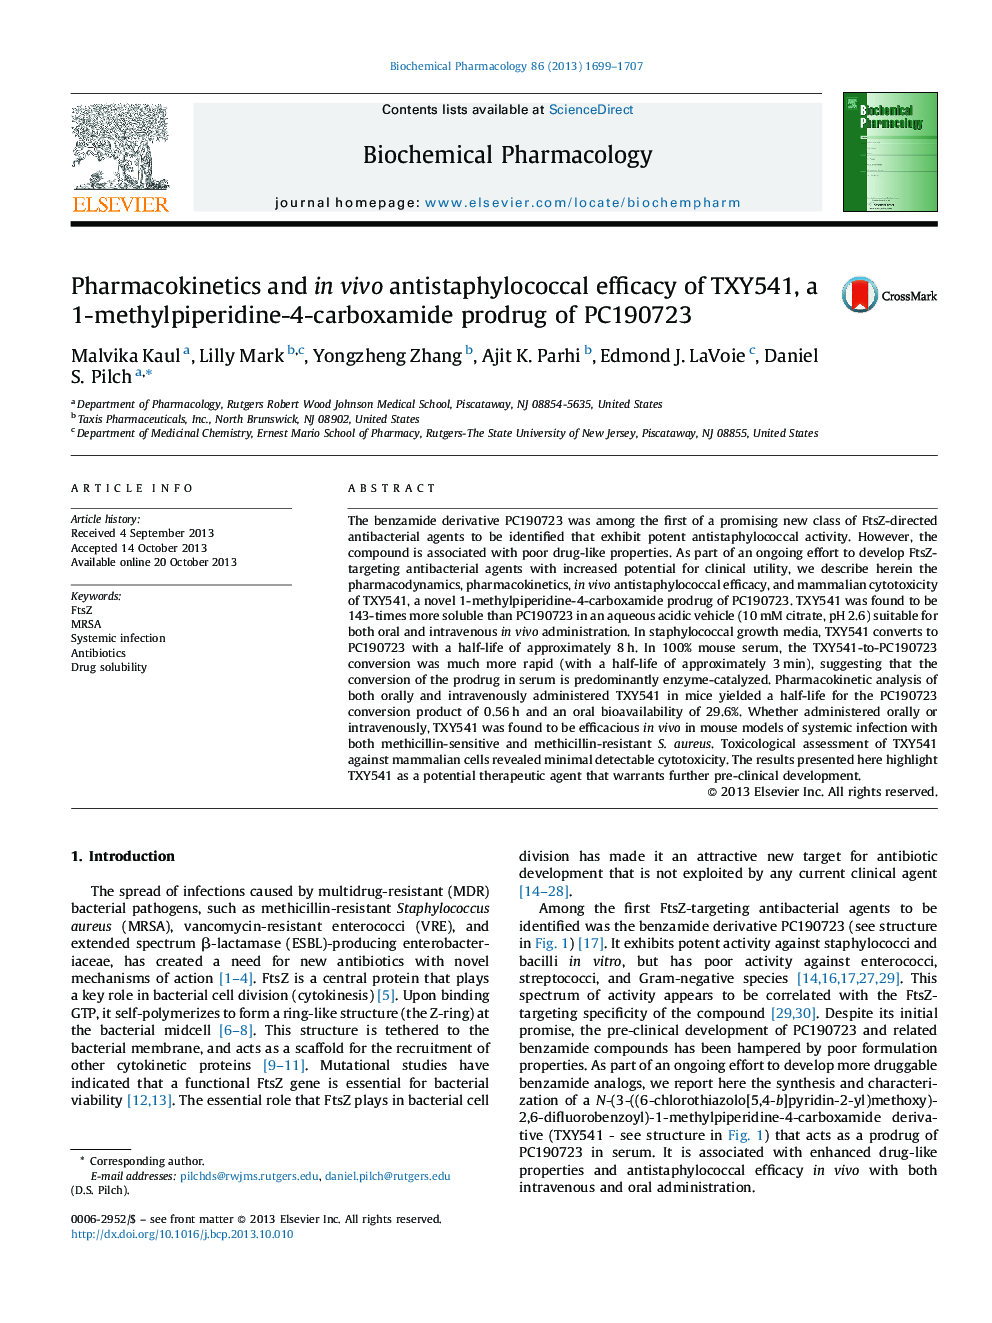 Pharmacokinetics and in vivo antistaphylococcal efficacy of TXY541, a 1-methylpiperidine-4-carboxamide prodrug of PC190723